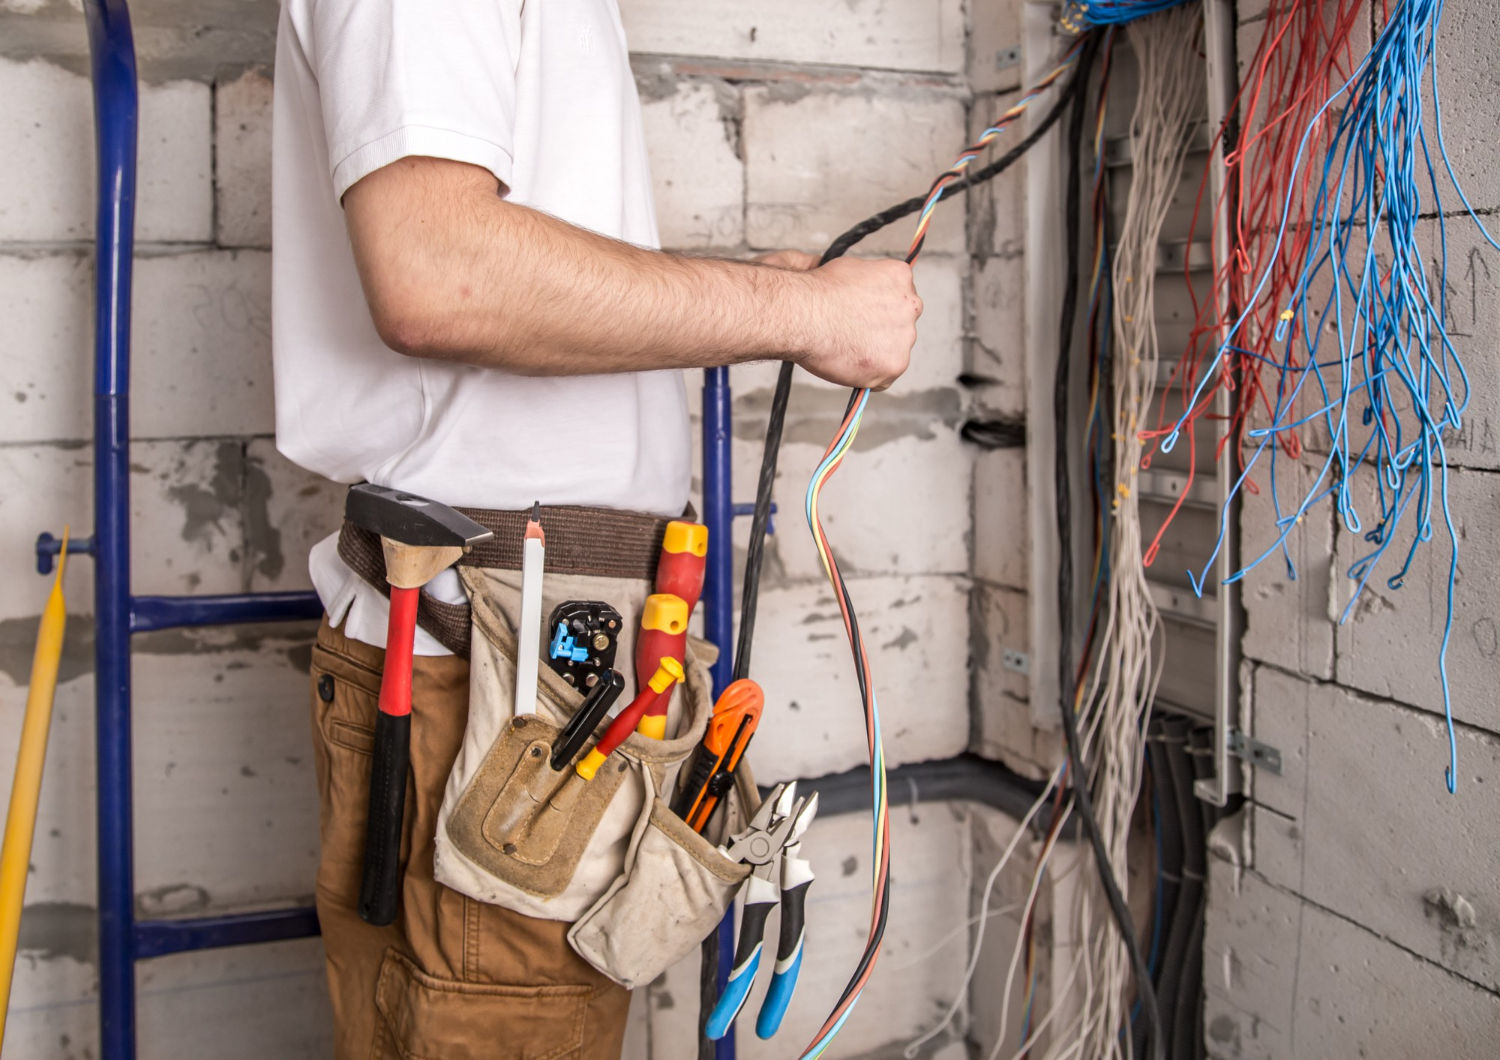 electrician working near board with wires installation connection electrics